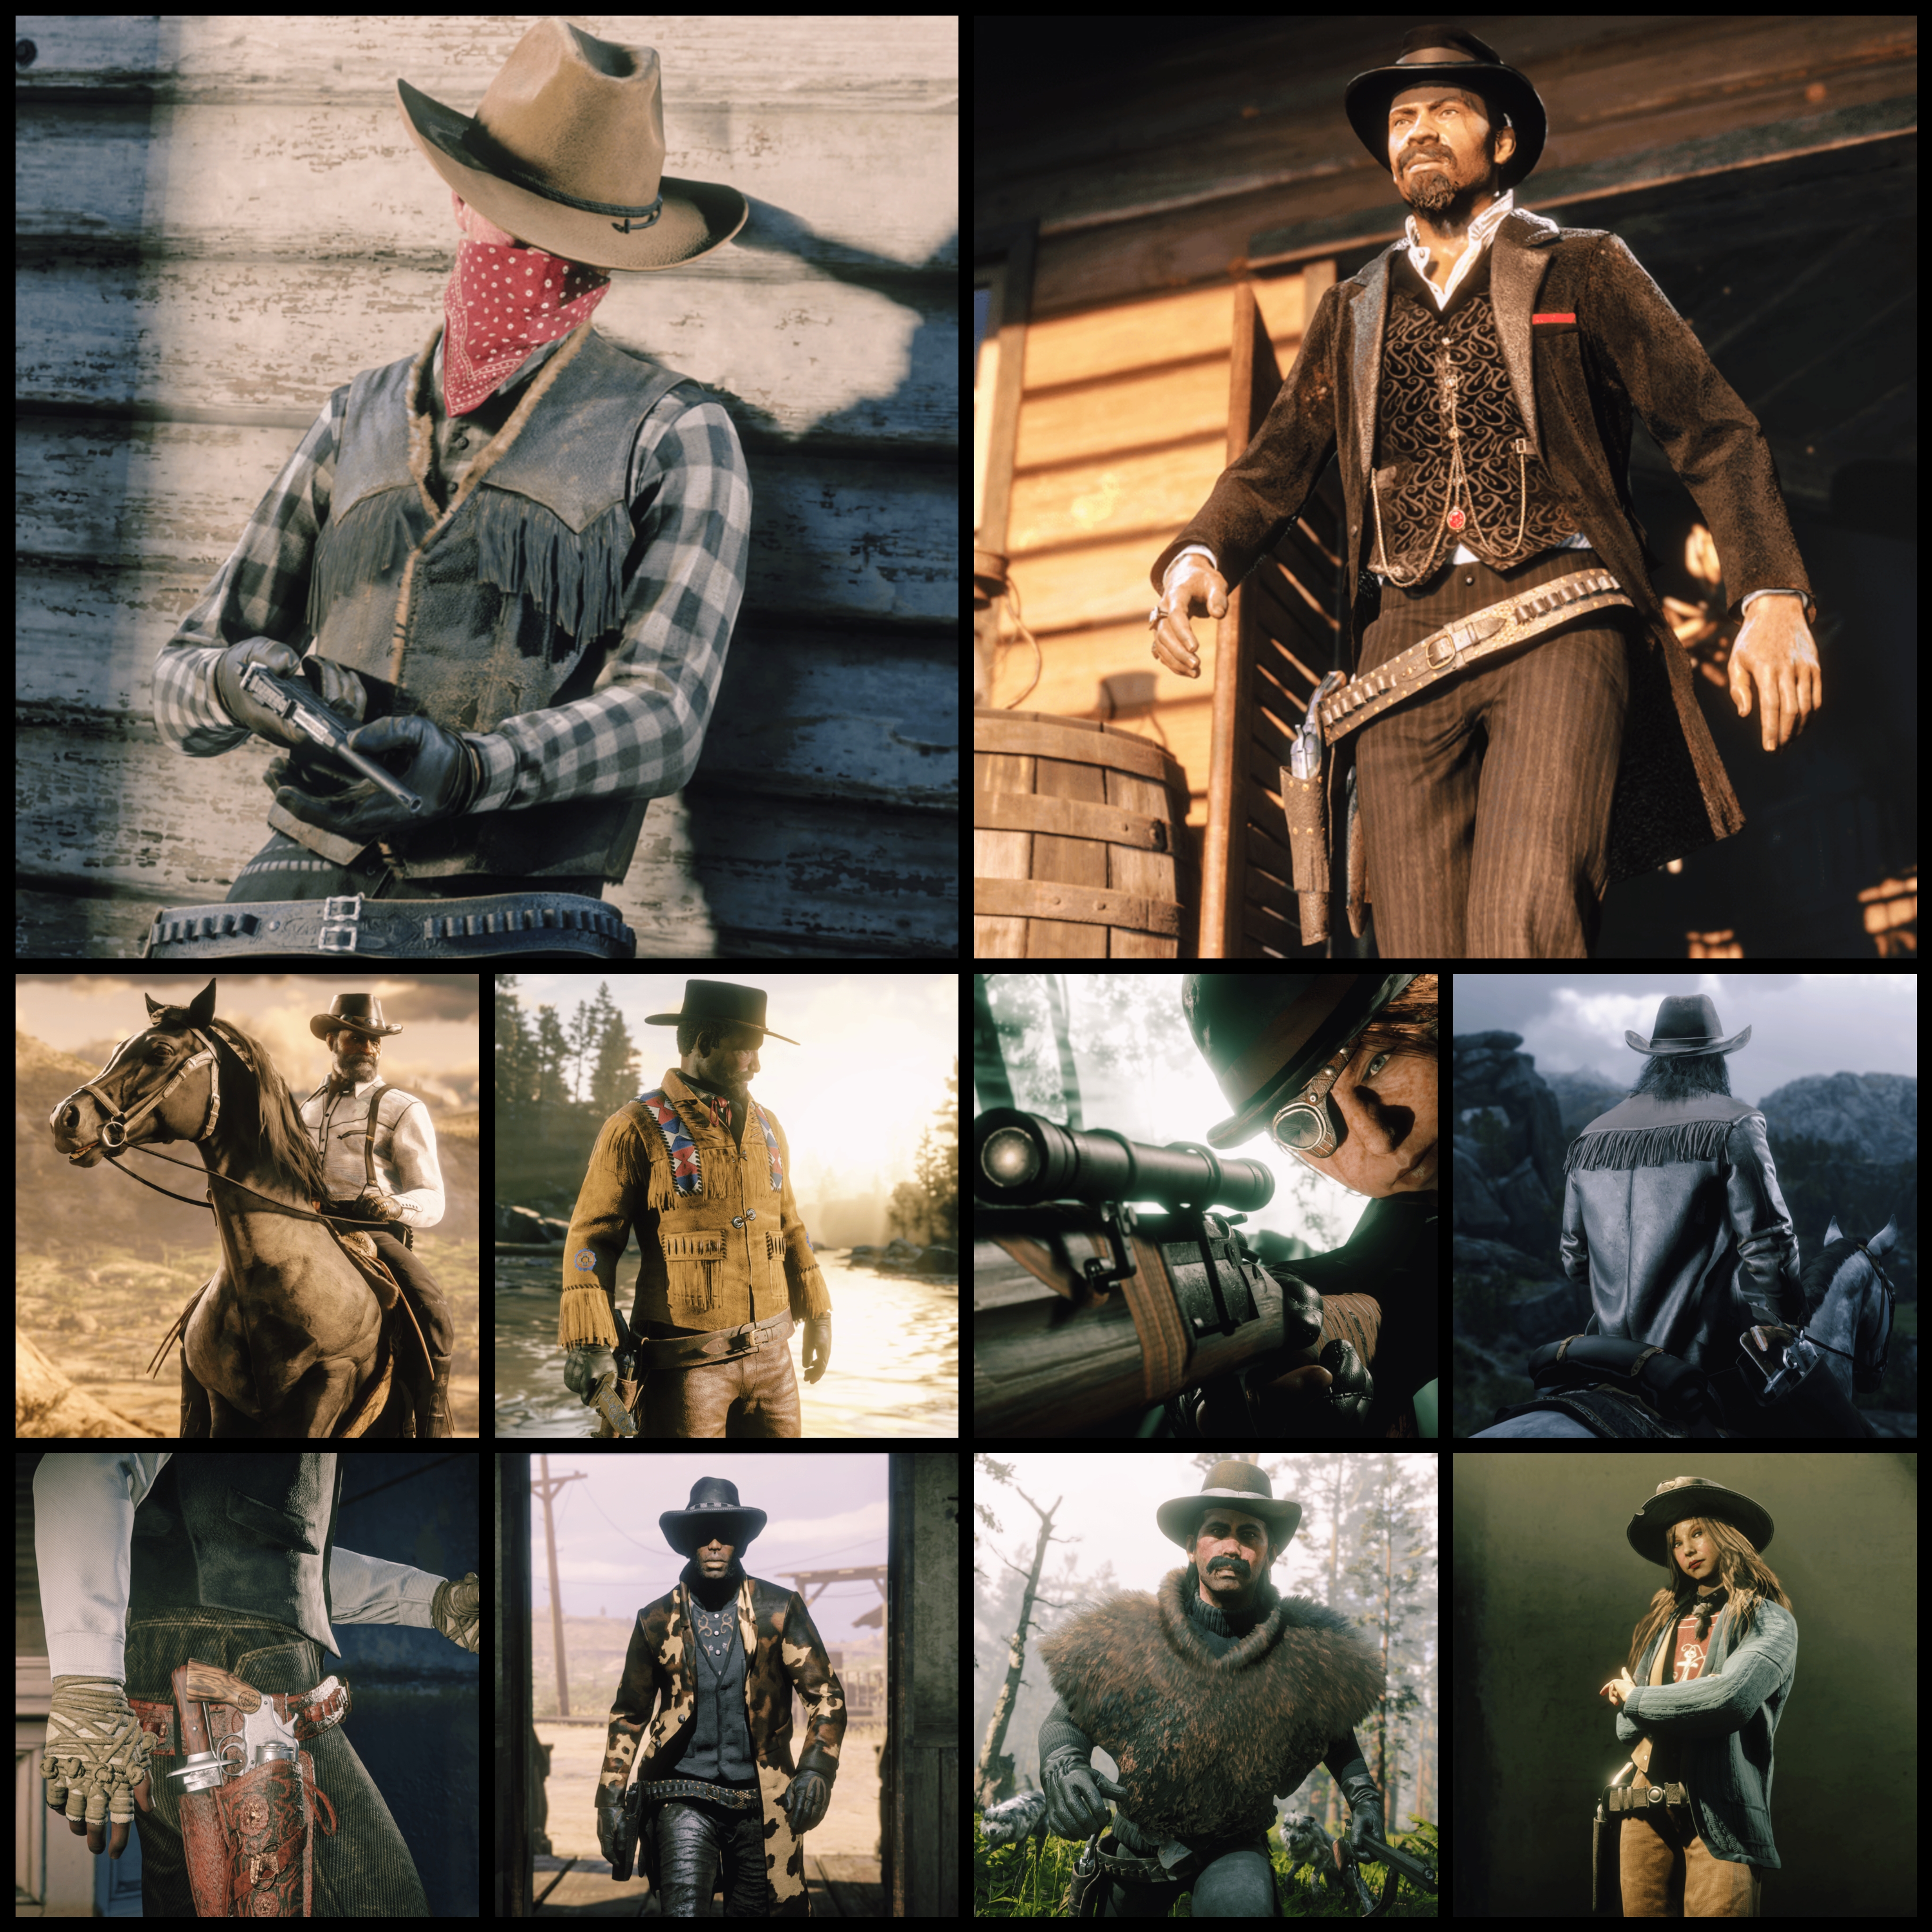 Outfit fashion of RDO characters